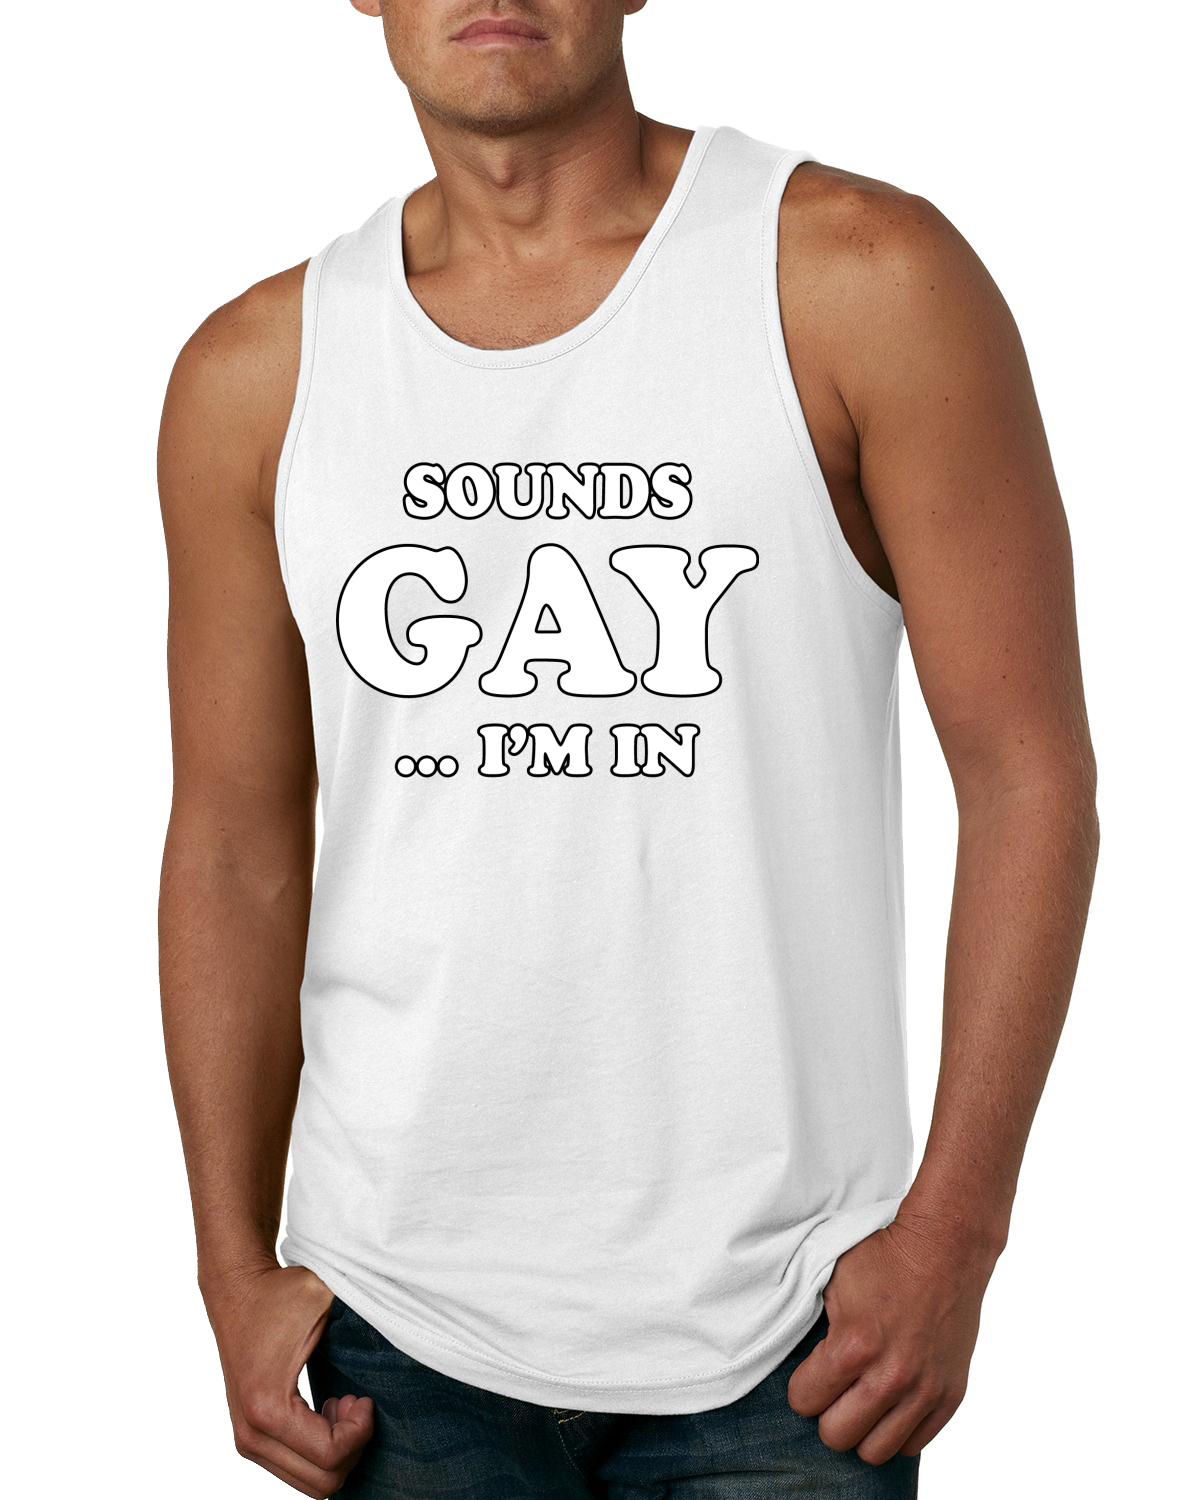 Sounds Gay Im In Funny Lgbt Pride Men Humor Tank Top Ally Novelty Muscle Shirt Ebay